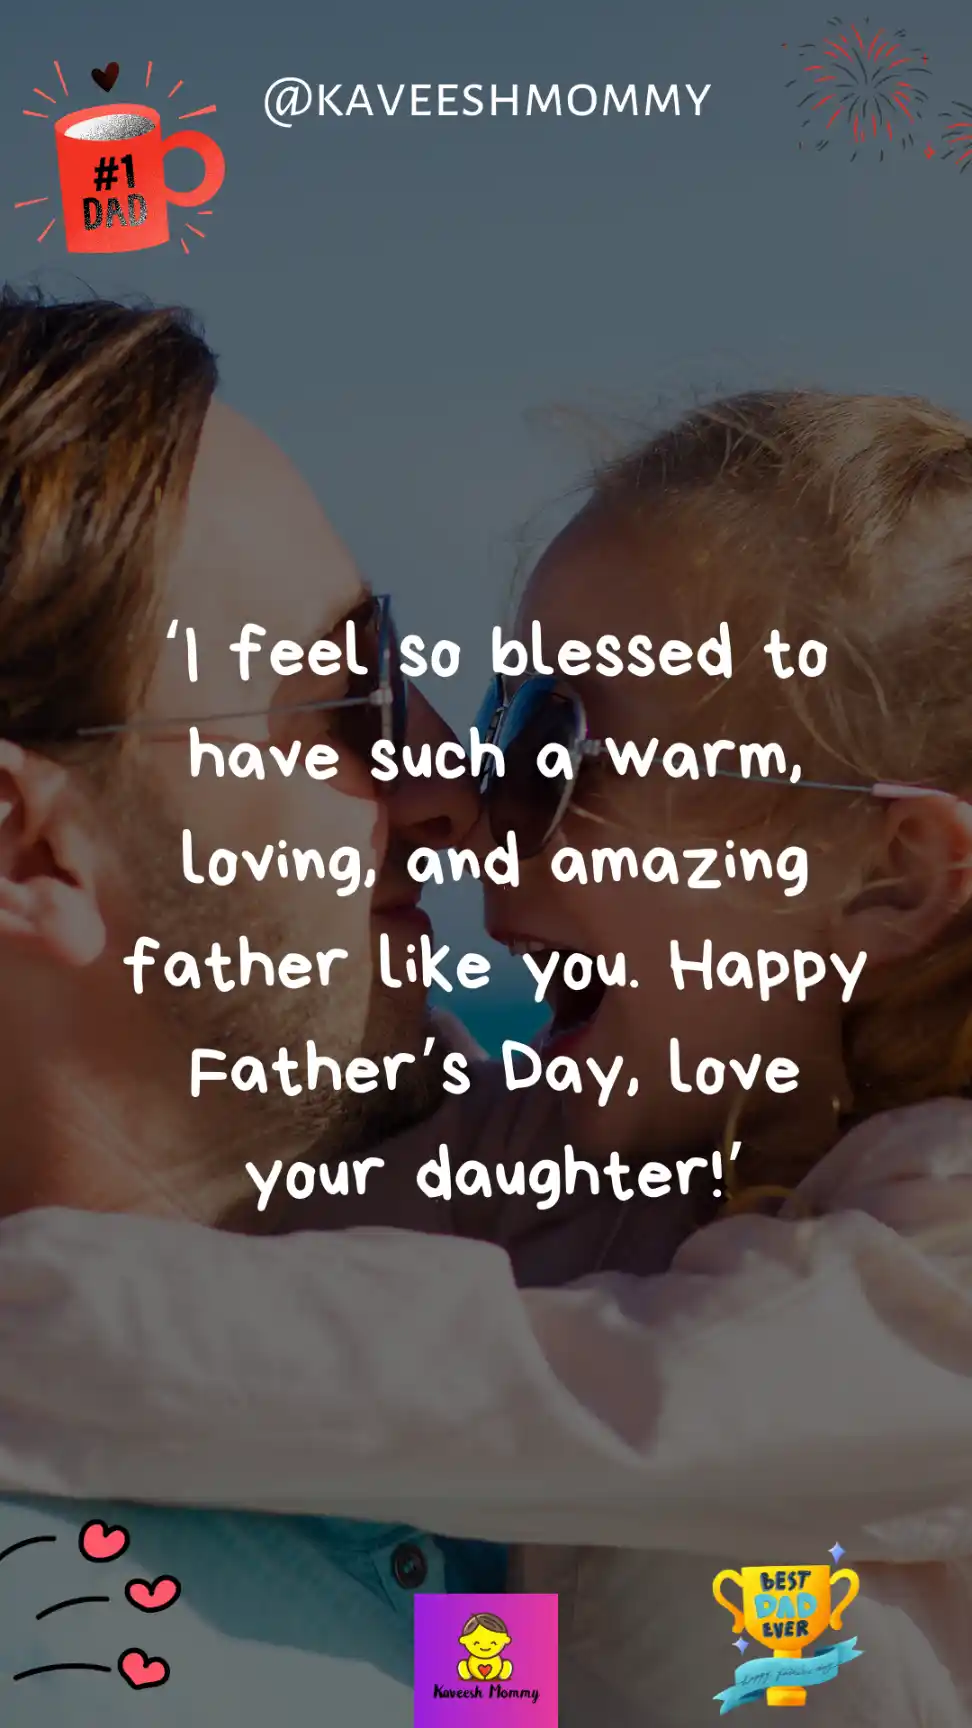 father's day from daughter-‘I feel so blessed to have such a warm, loving, and amazing father like you. Happy Father’s Day, love your daughter!’